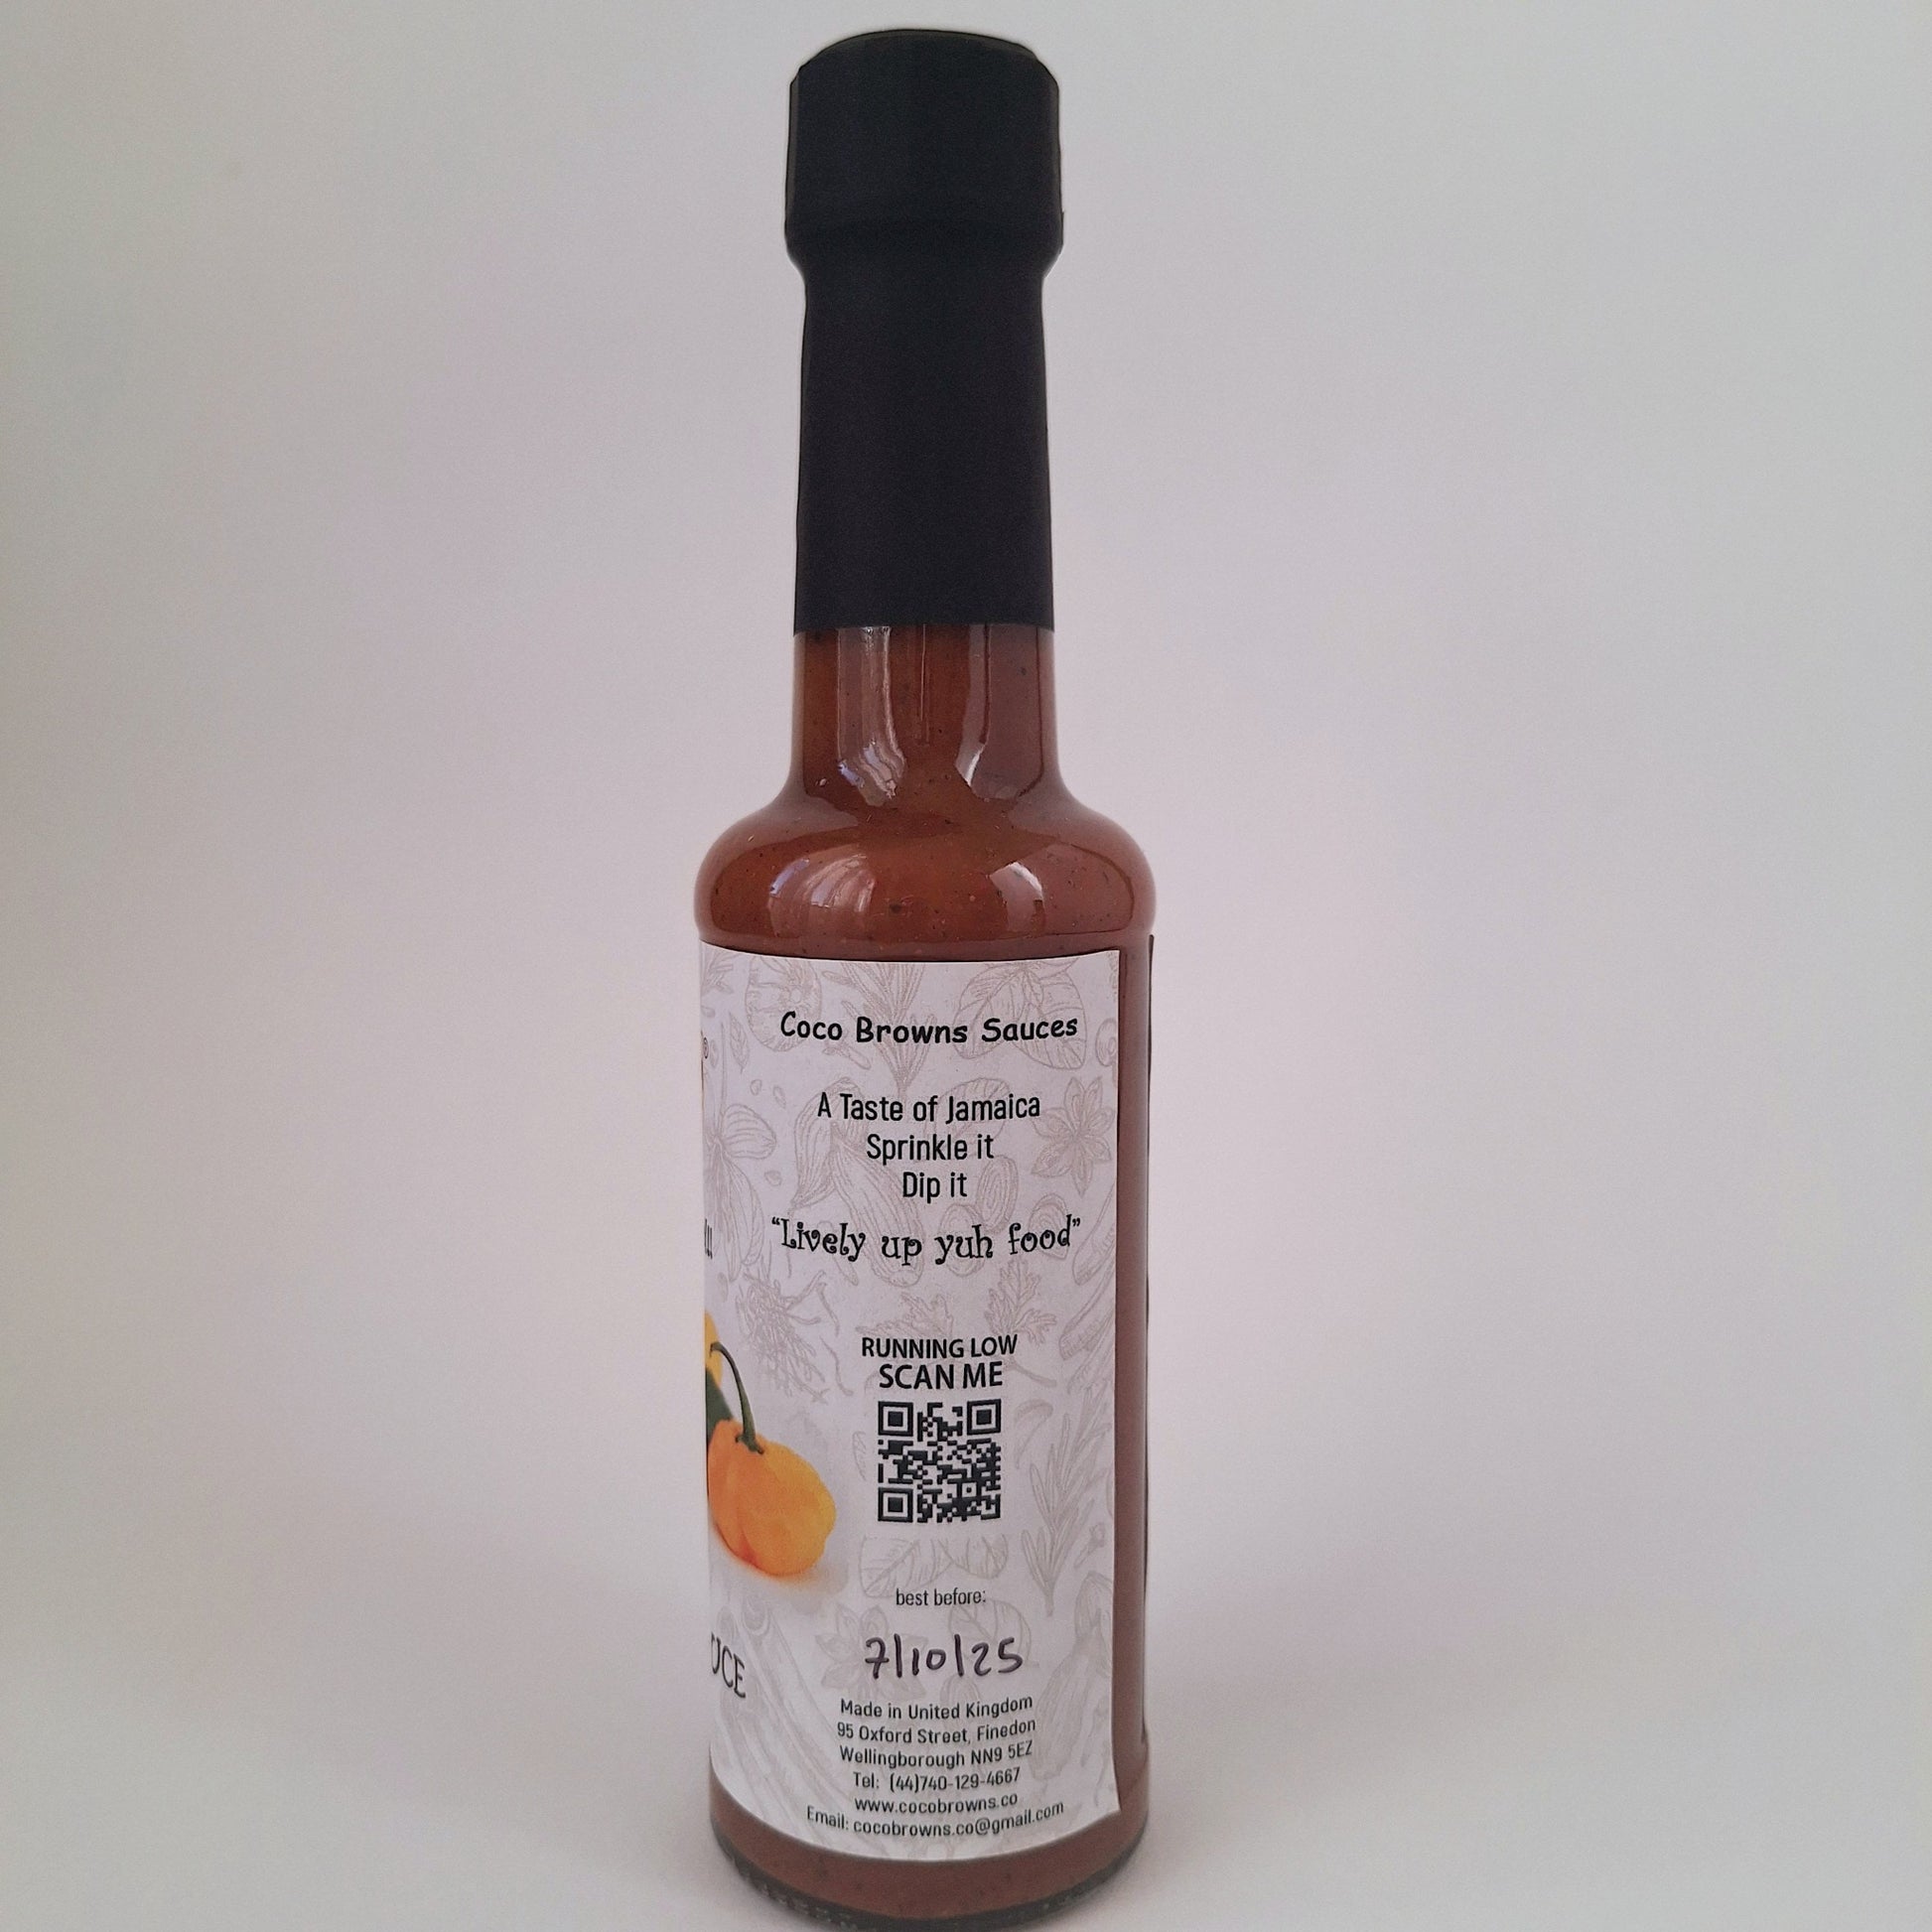 Coco Browns Gourmet Scotch Bonnet Sauce right side